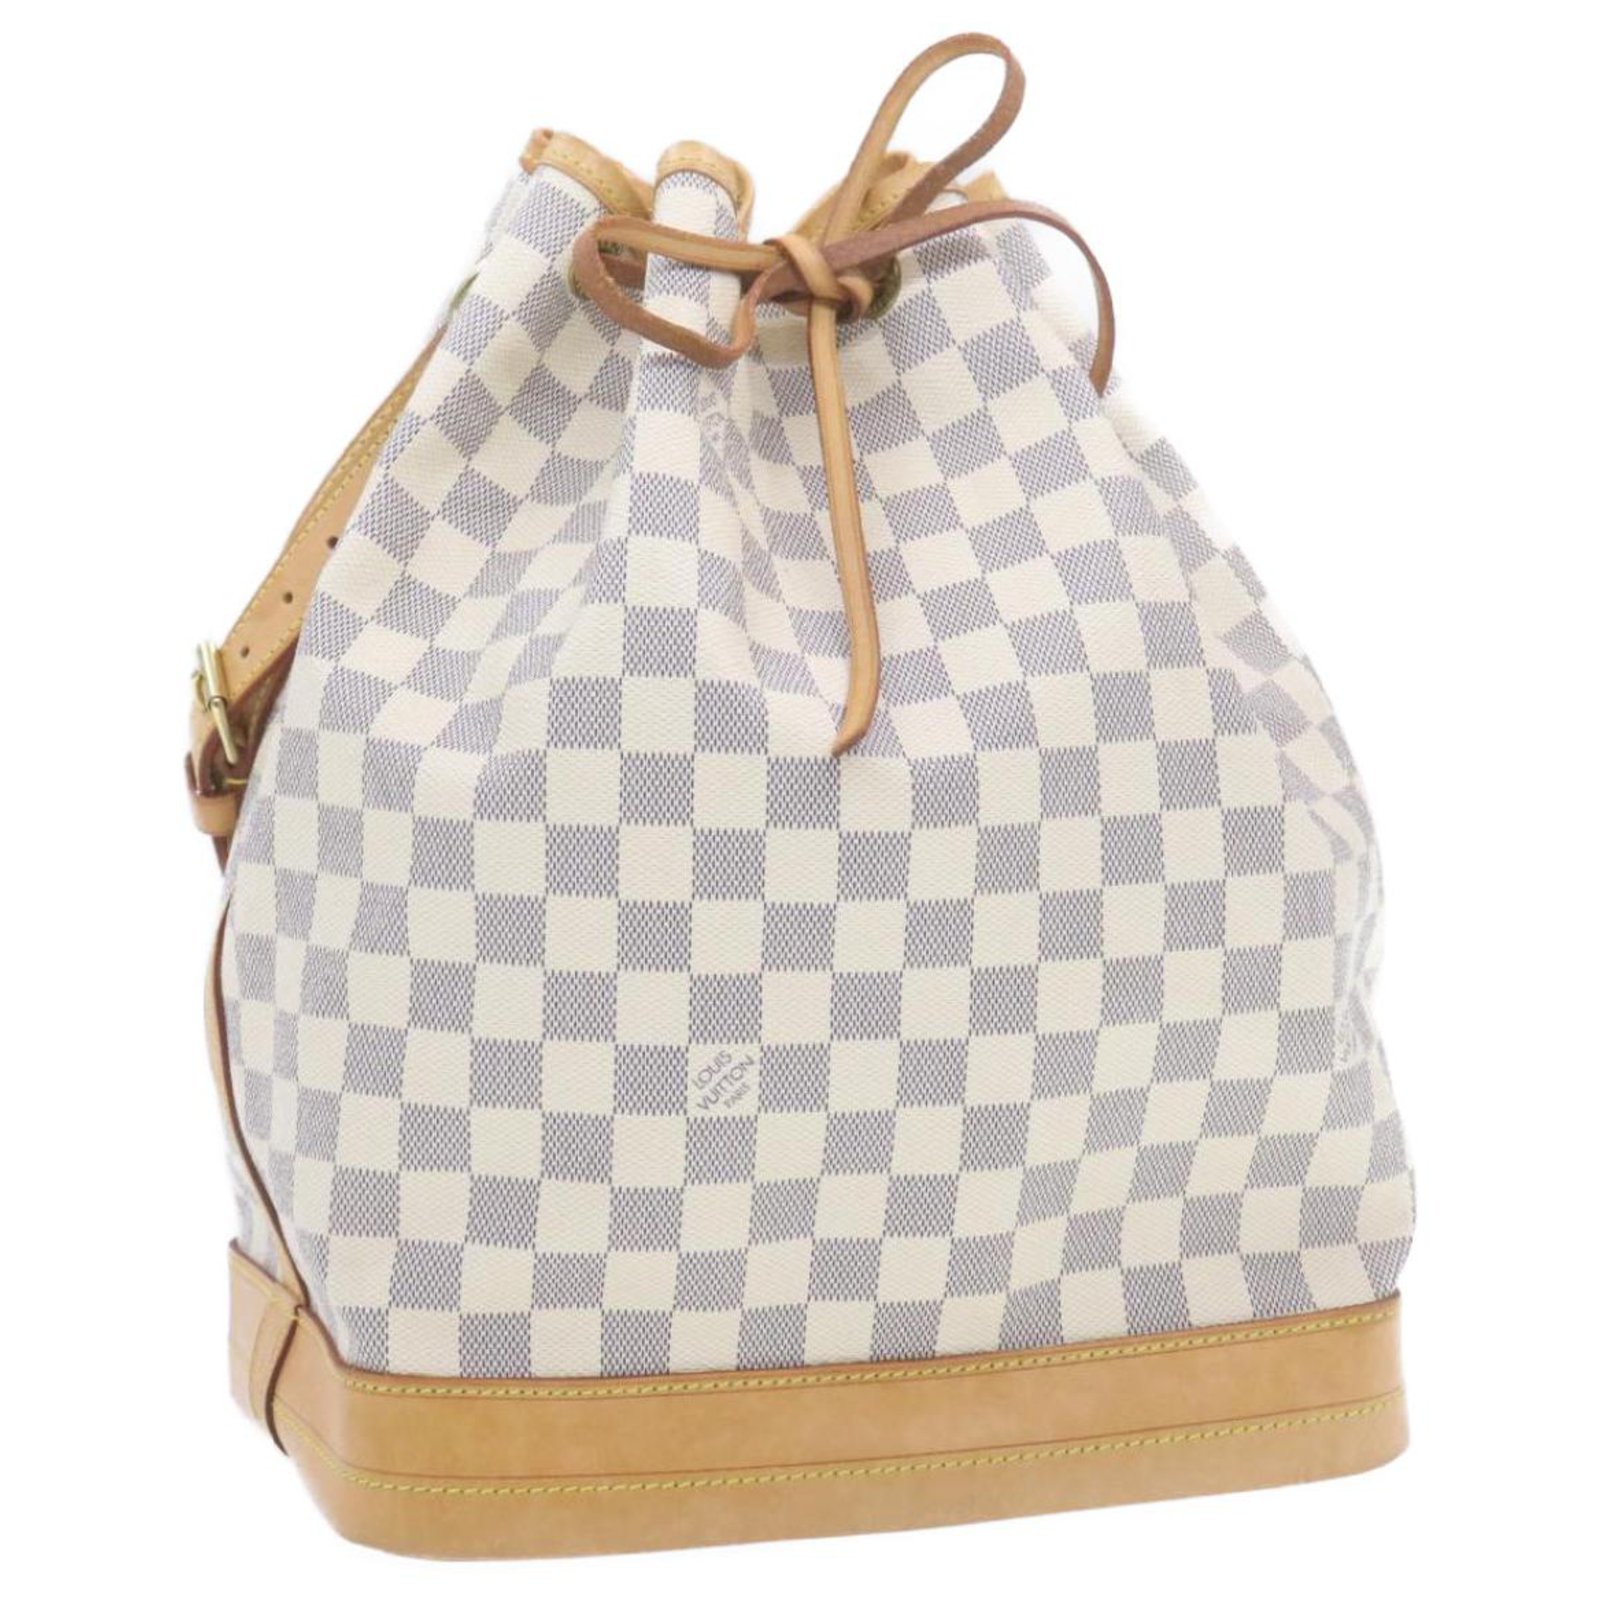 Usnasa Preloved - Authentic LOUIS VUITTON Noe Damier Azur Drawstring  Shoulder Bag Made in France Date code : AR4047 Good condition (7.9/10)  ***come with original dustbag Price : RM2500 Wasup +60139491441 (Nasa)